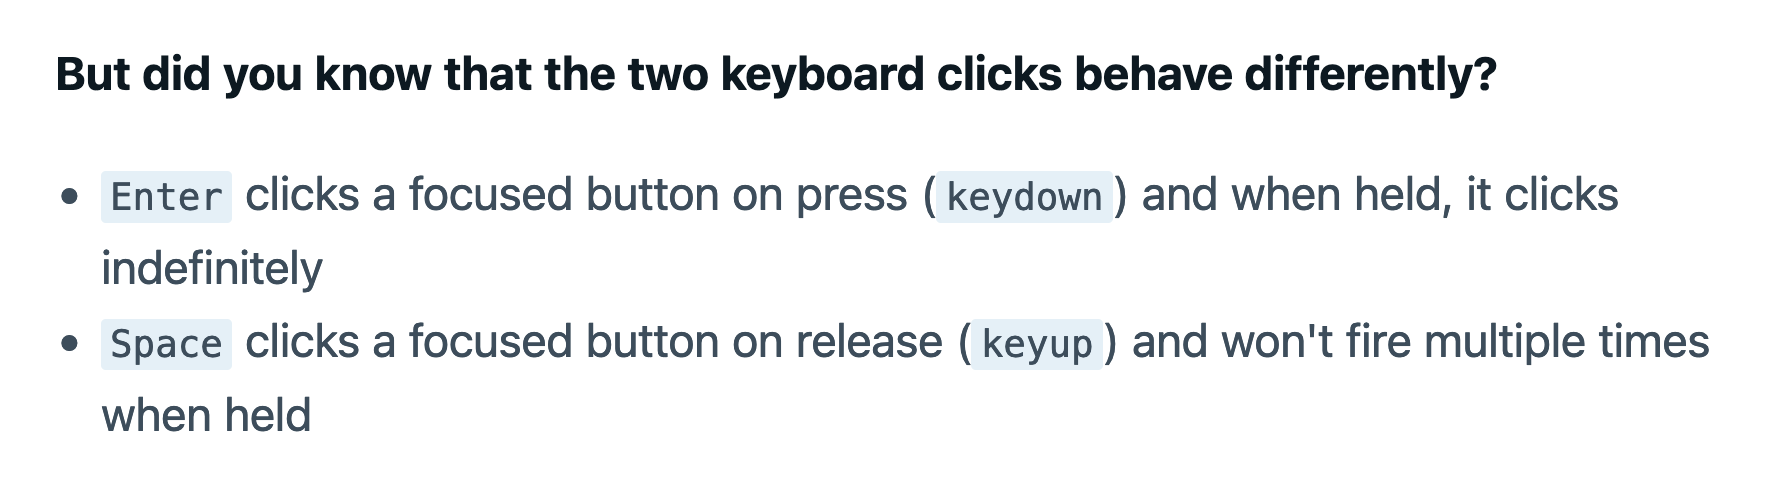 But did you know that the two keyboard clicks behave differently? Enter clicks a focused button on press (keydown) and when held, it clicks indefinitely. Space clicks a focused button on release (keyup) and won't fire multiple times when held.